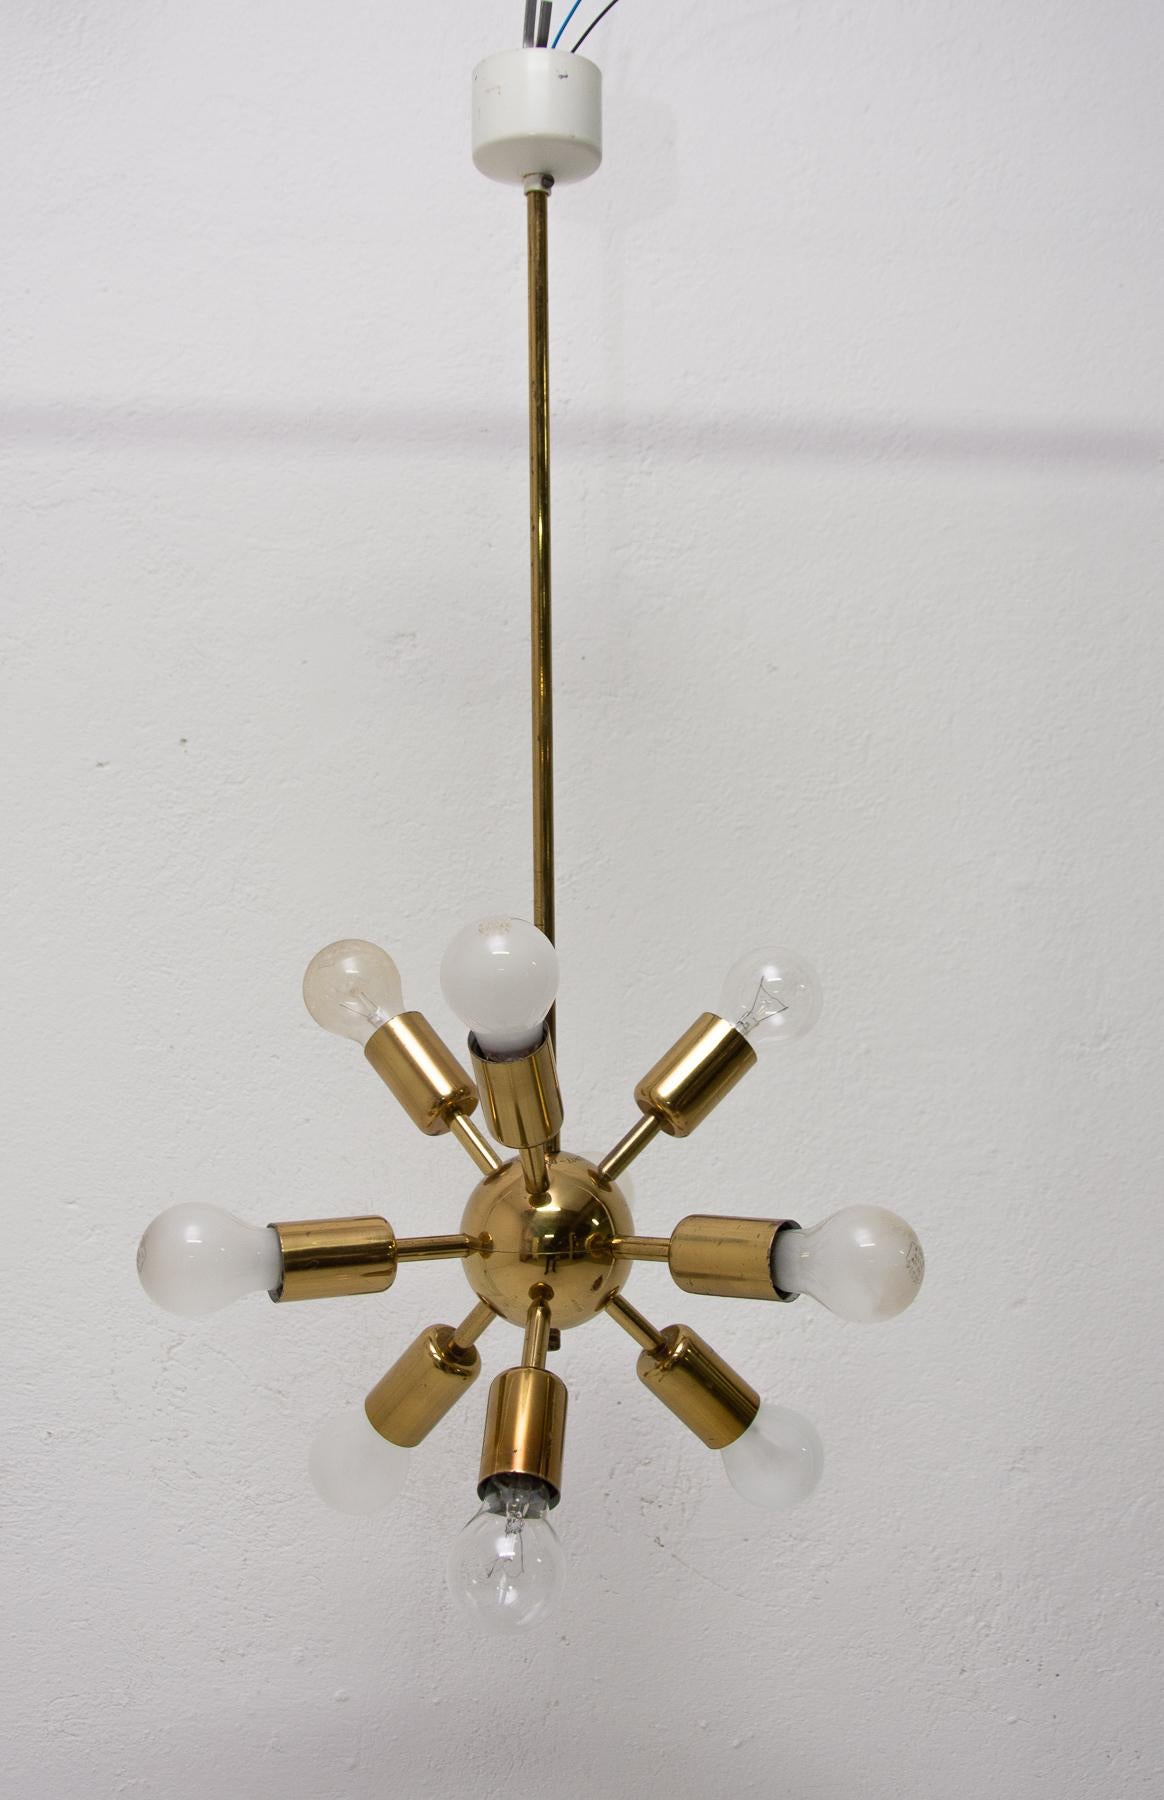 This Space Age Sputnik chandelier was made in the former Czechoslovakia in the 1960s by Drupol company. It features 10 brass arms with E27 bulb socket. The chandelier is in very good vintage condition just bears a minor signs of age and using. It